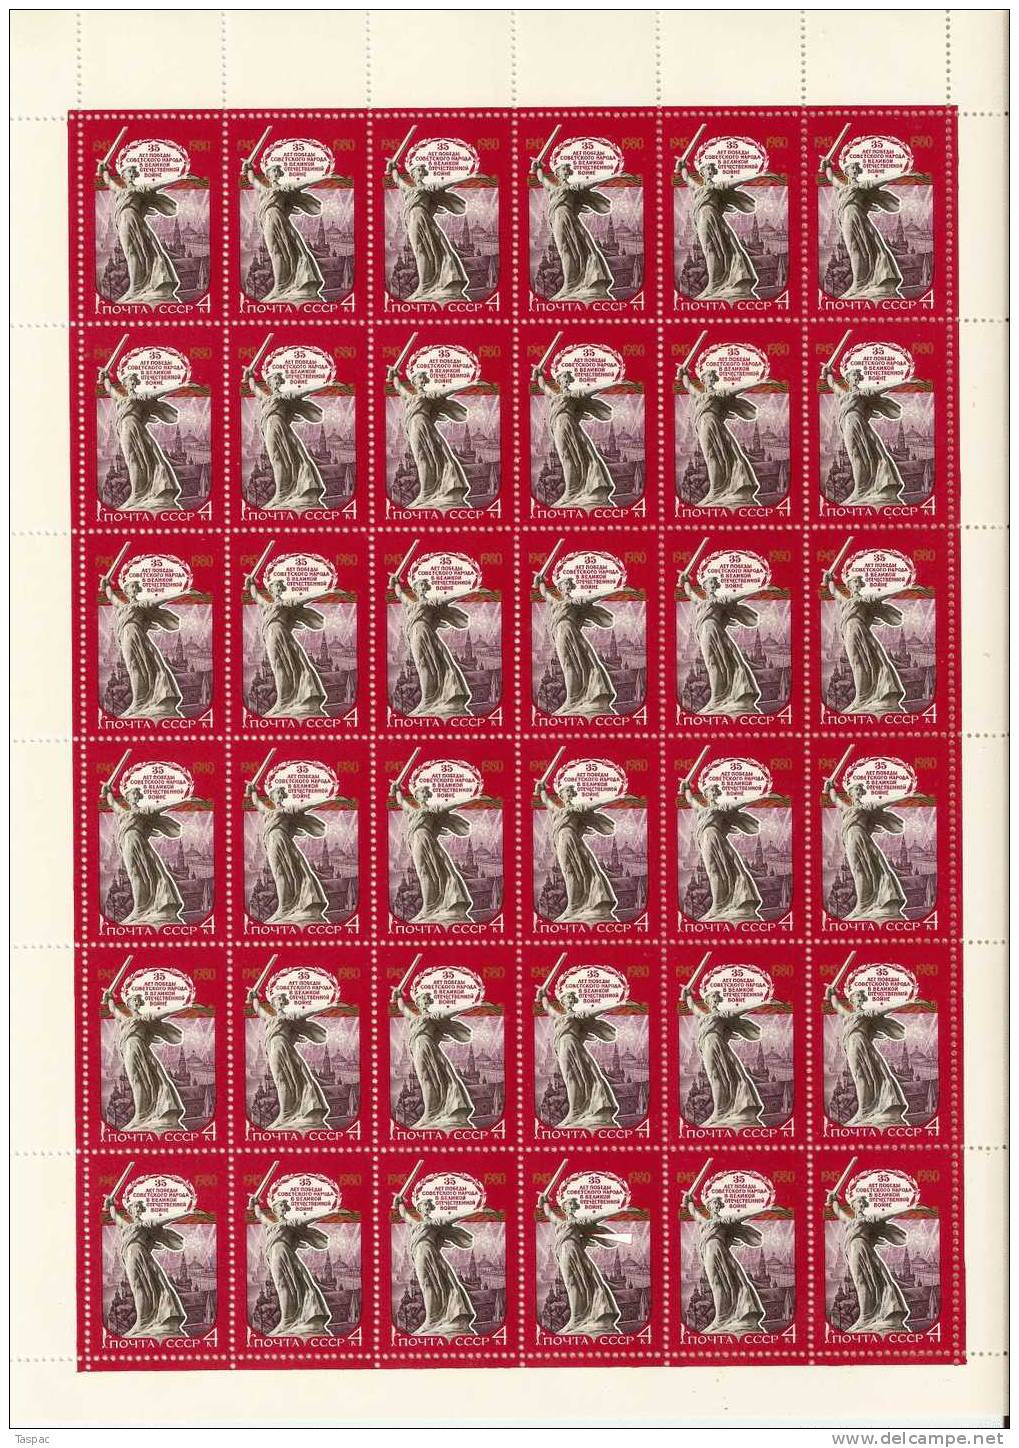 Russia 1980 Mi# 4945 Sheet With Plate Errors Pos. 34 - WWII Victory - Errors & Oddities